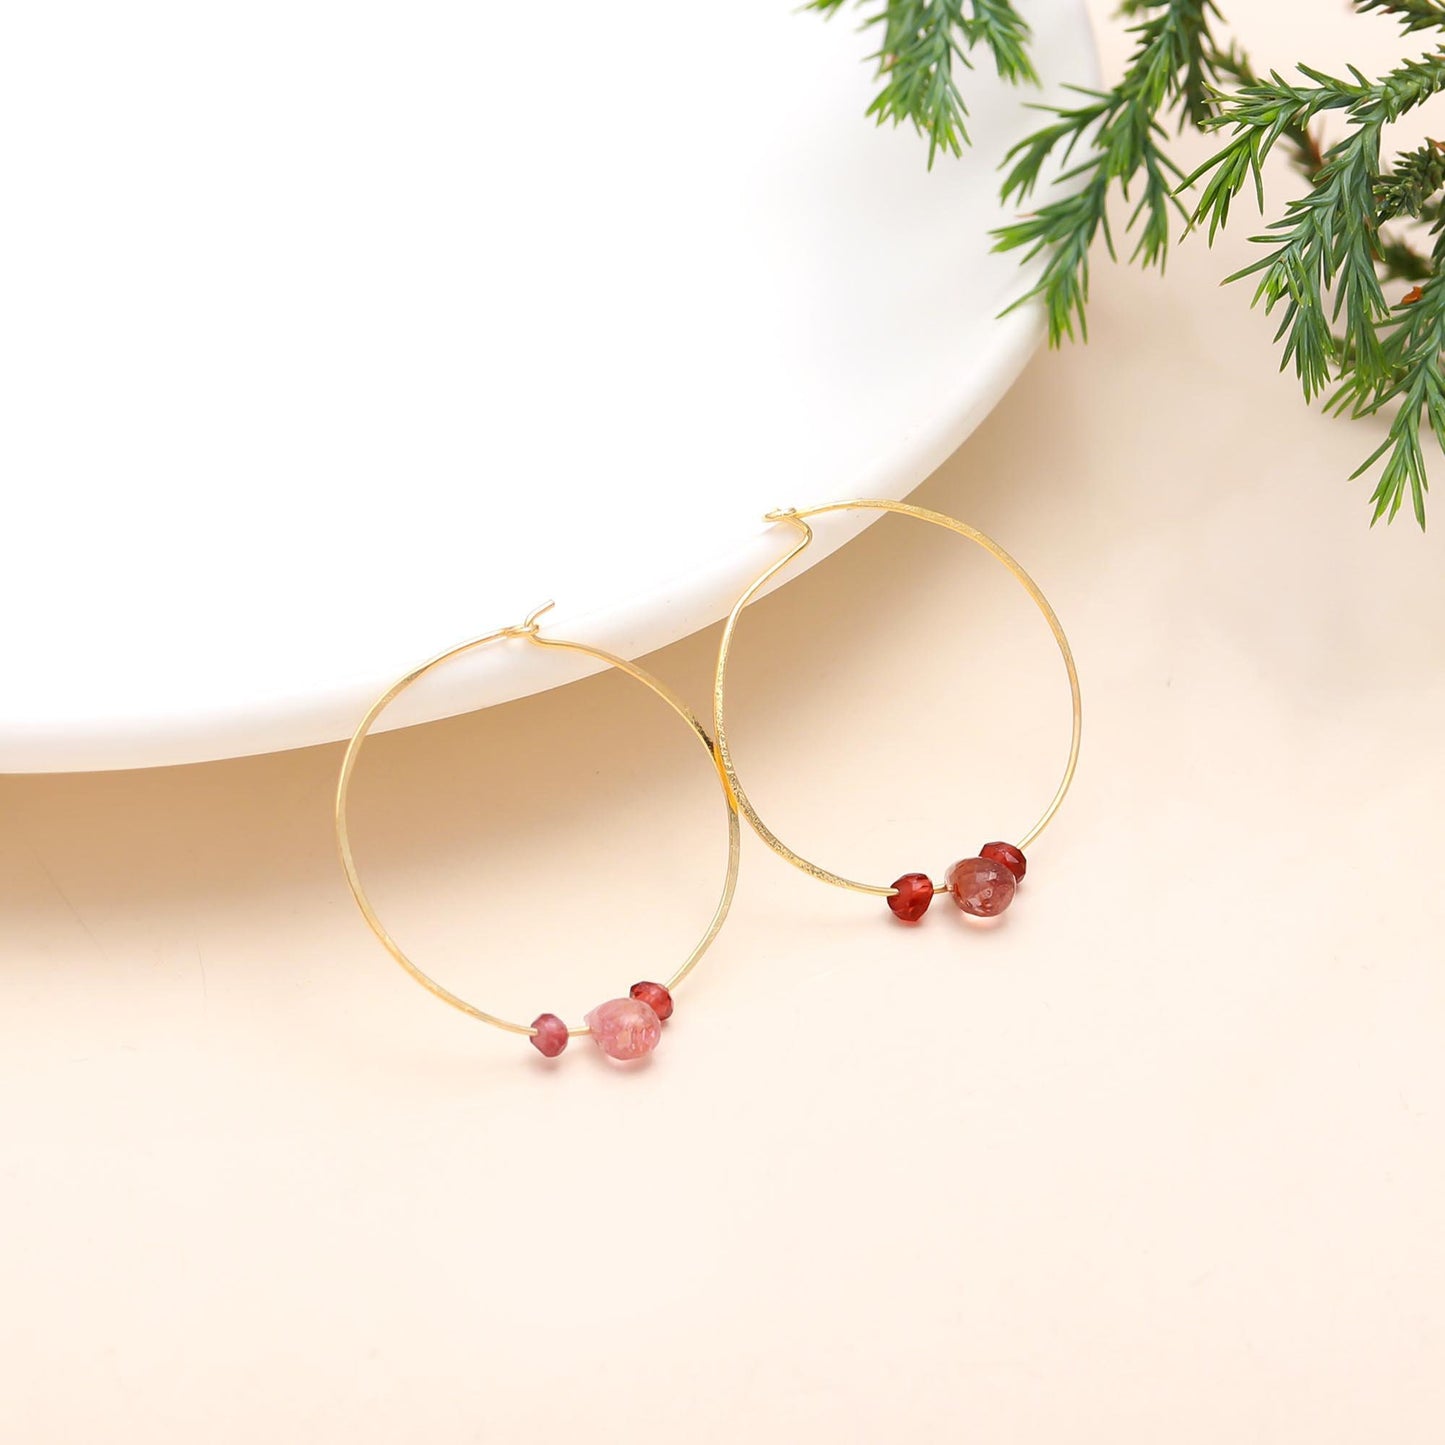 Solid 925 Sterling Silver Sapphire Hoop Earring with Rose, Gold Plating, Gift Birthday, Anniversary, Mothers Day, Christmas, Women, Girl